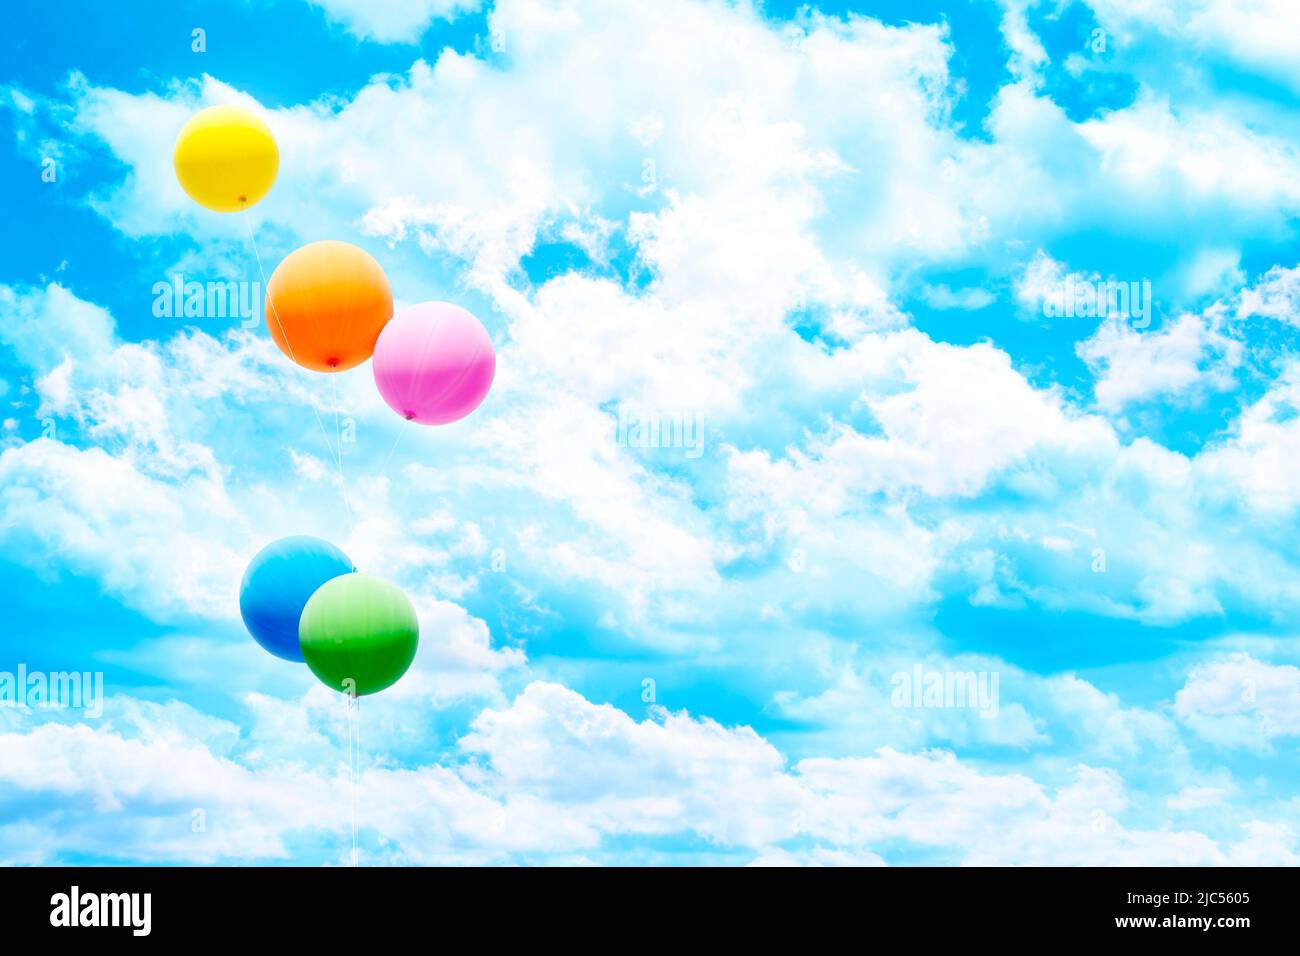 Five colorful air balloons over blue sky and white clouds. Stock Photo